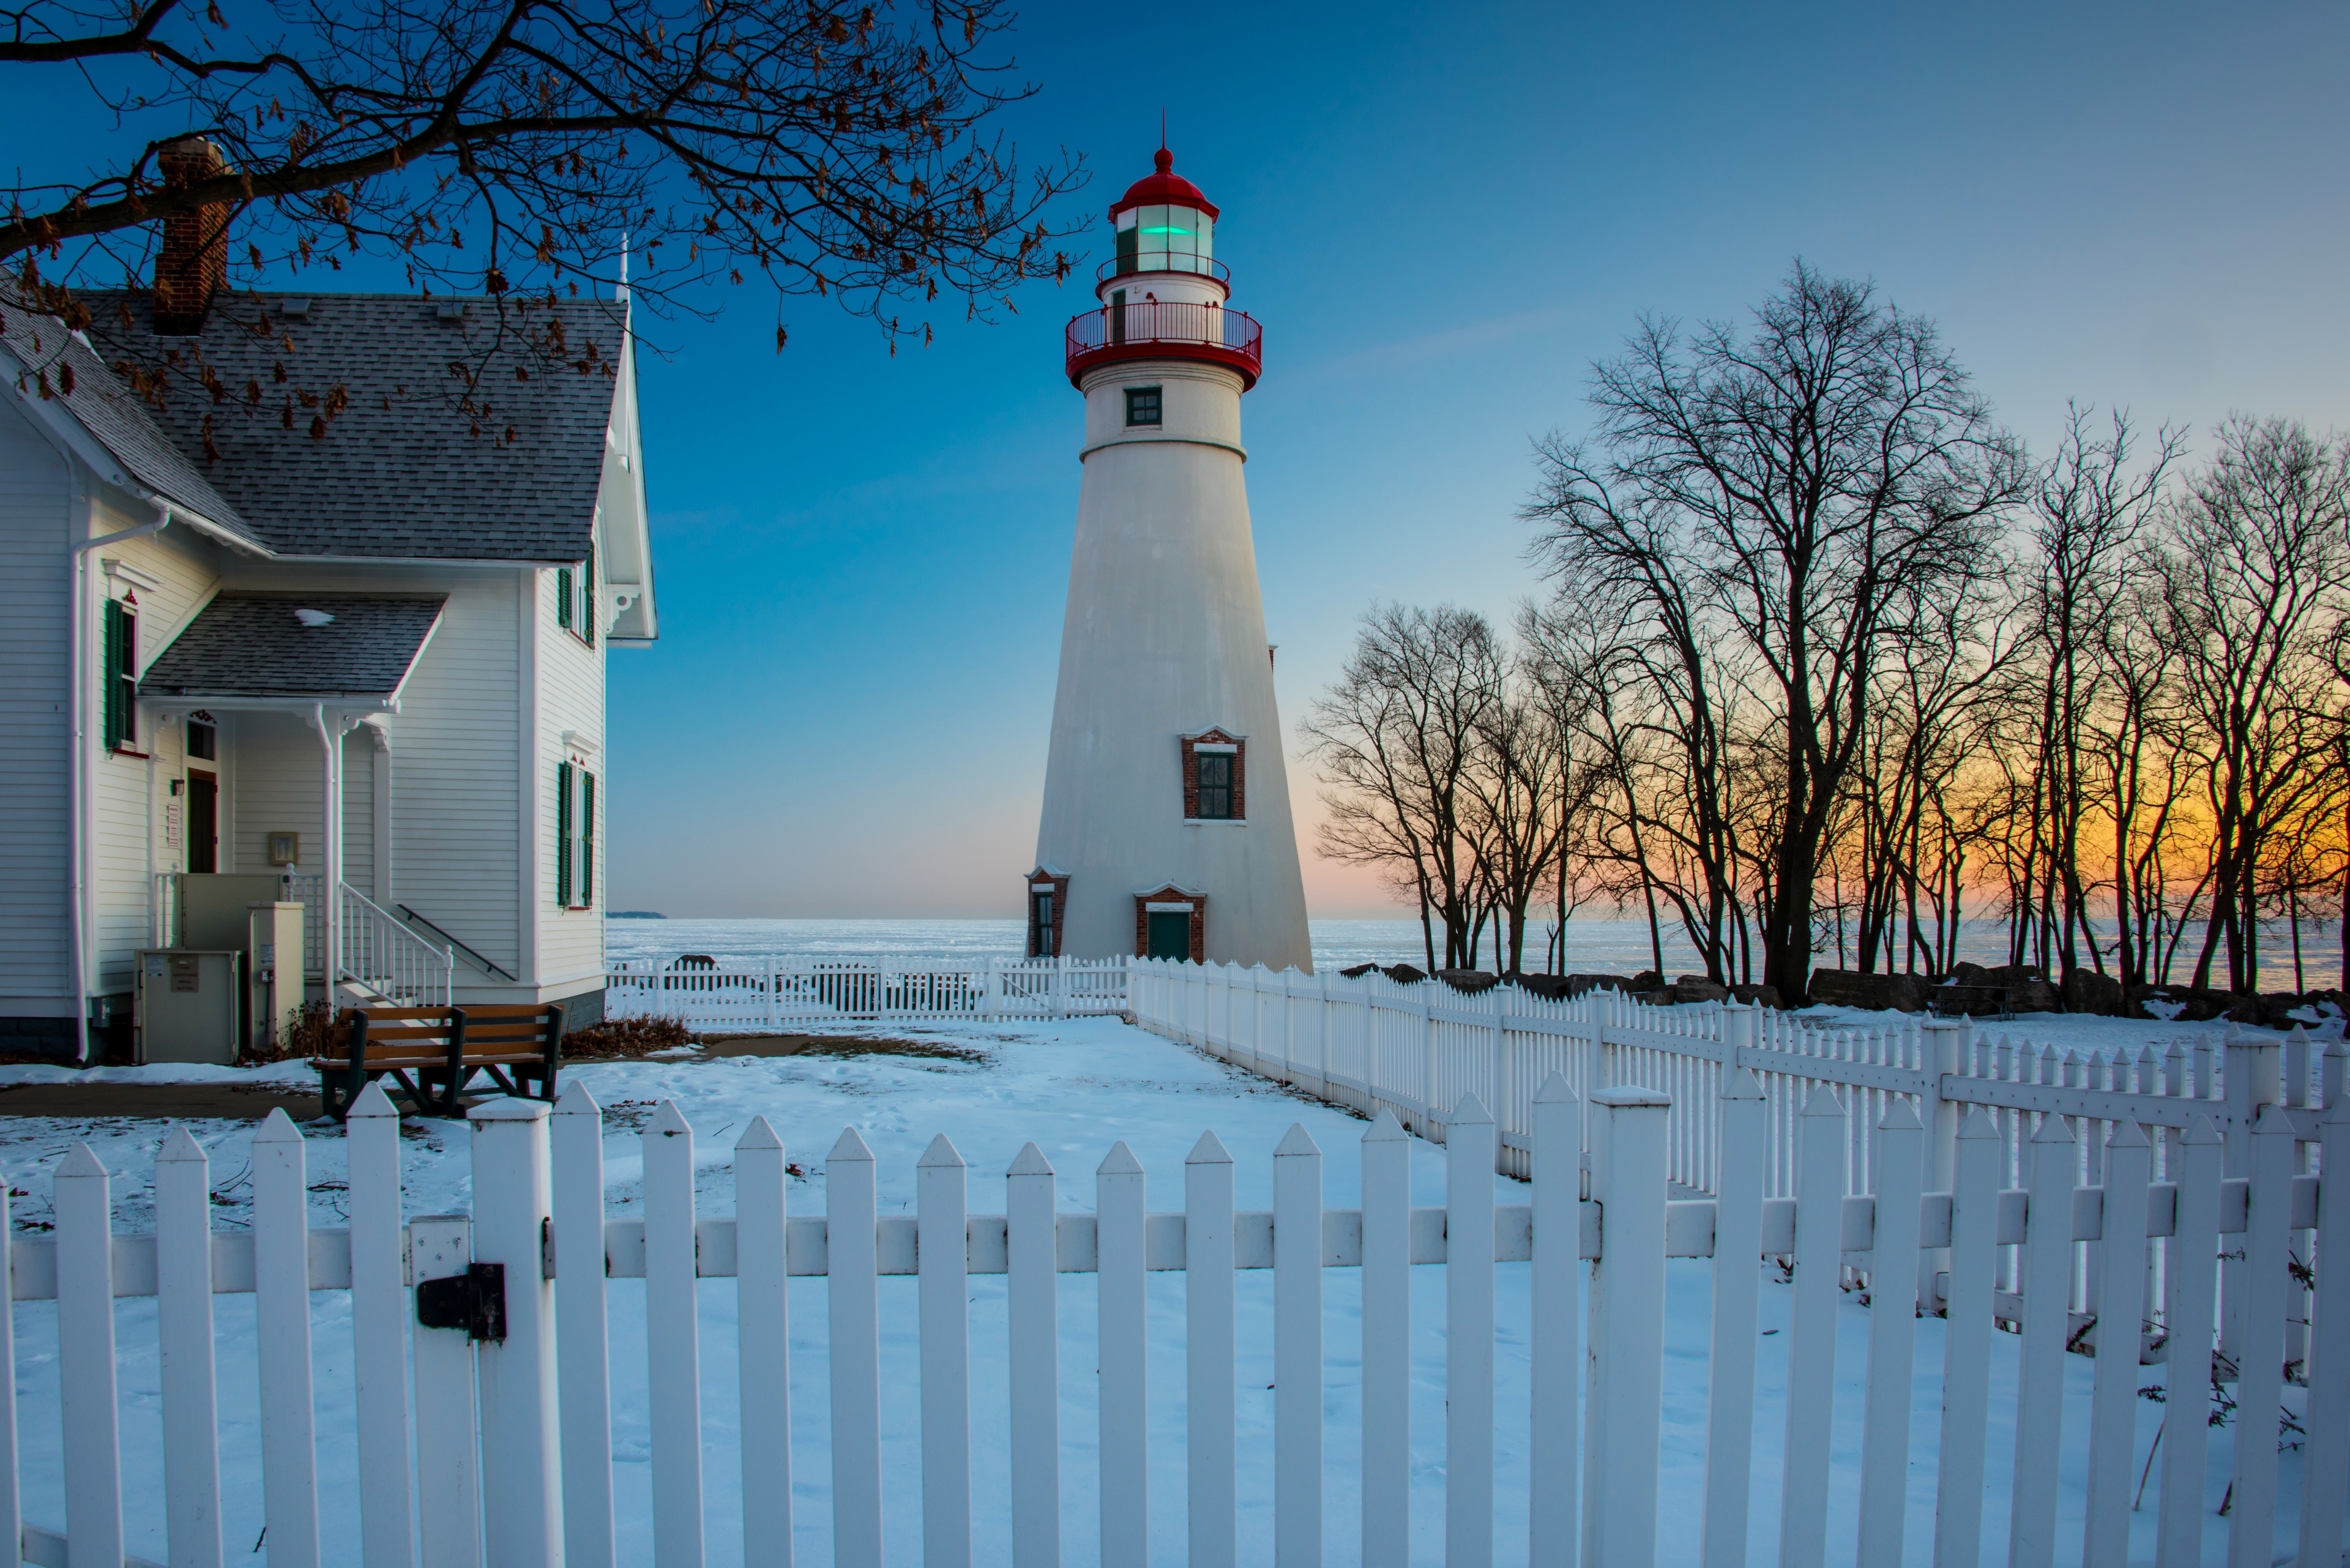 Marblehead Lighthouse, Marblehead Vacation Rentals boat rentals & more